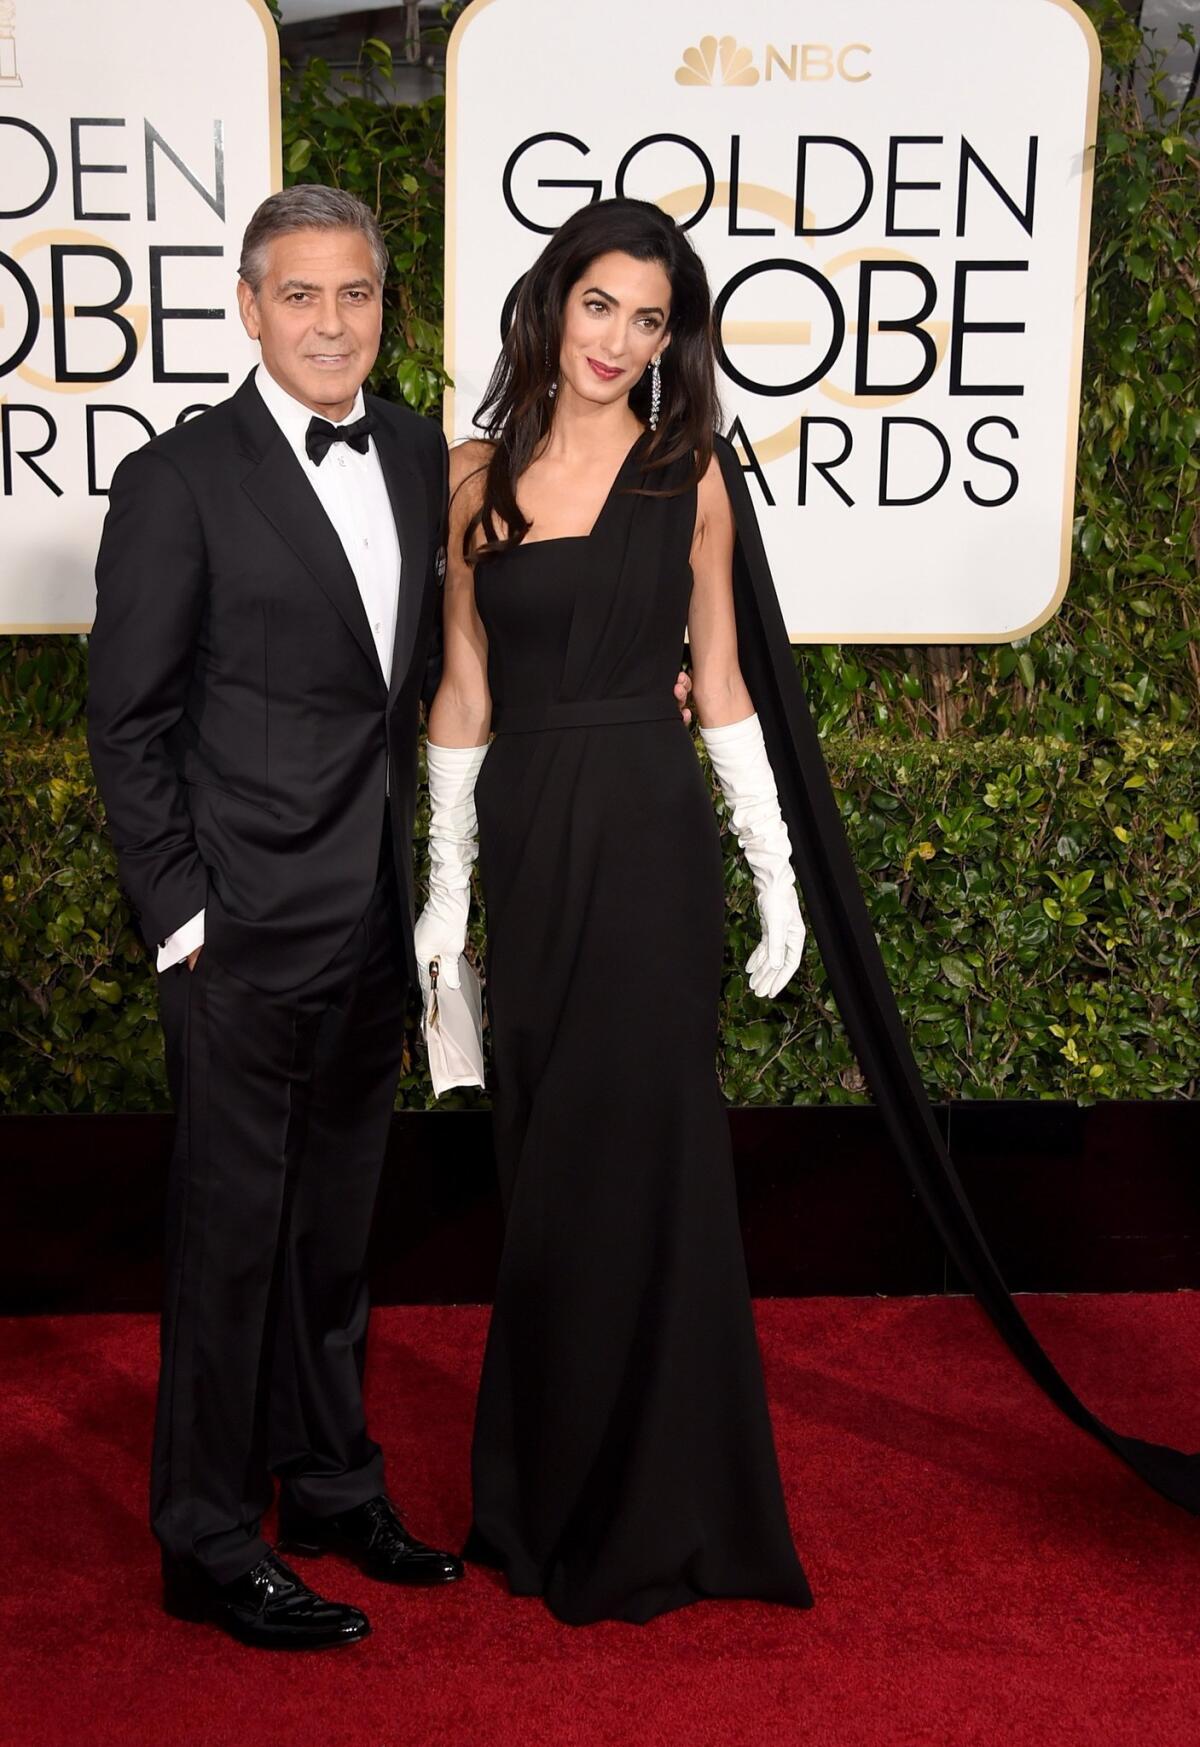 BEVERLY HILLS, CA - JANUARY 11: Actor George Clooney and lawyer Amal Alamuddin Clooney attend the 72nd Annual Golden Globe Awards at The Beverly Hilton Hotel on January 11, 2015 in Beverly Hills, California. (Photo by Jason Merritt/Getty Images) ** OUTS - ELSENT, FPG - OUTS * NM, PH, VA if sourced by CT, LA or MoD **